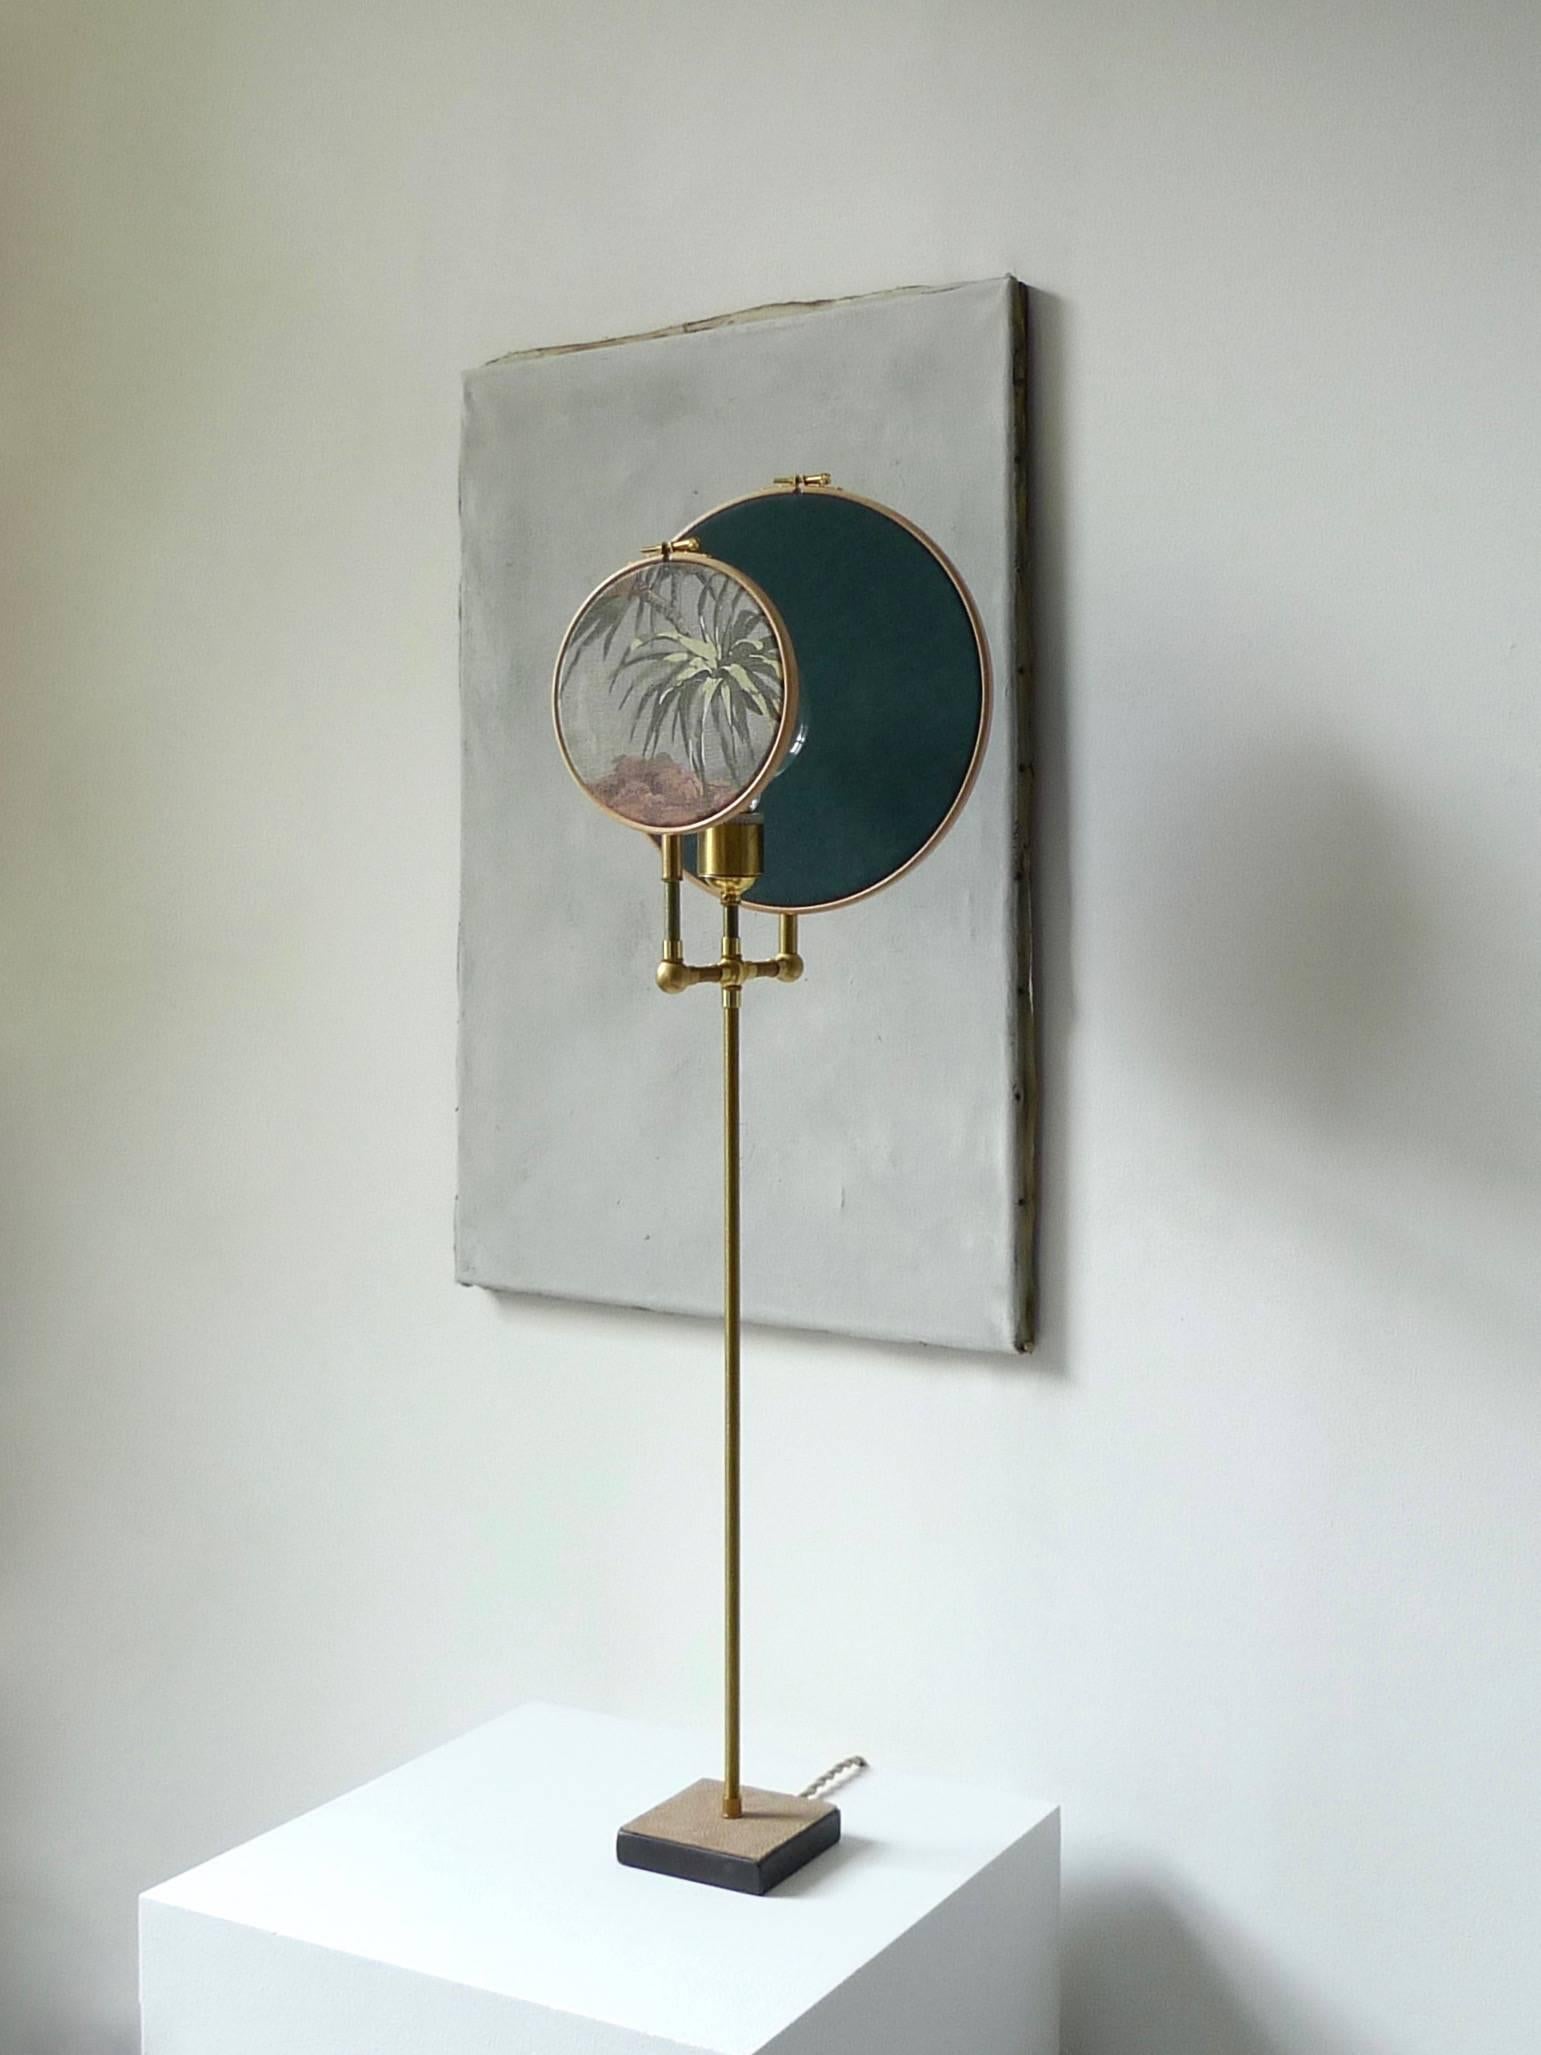 Light object, floor lamp, circle blue grey
Handmade in brass, leather, wood, hand printed, and painted linen.
A dimmer is inlaid with leather
Dimensions: H 83 x W 27 x D 16 cm
The design artwork is meticulously handcrafted in a limited series,